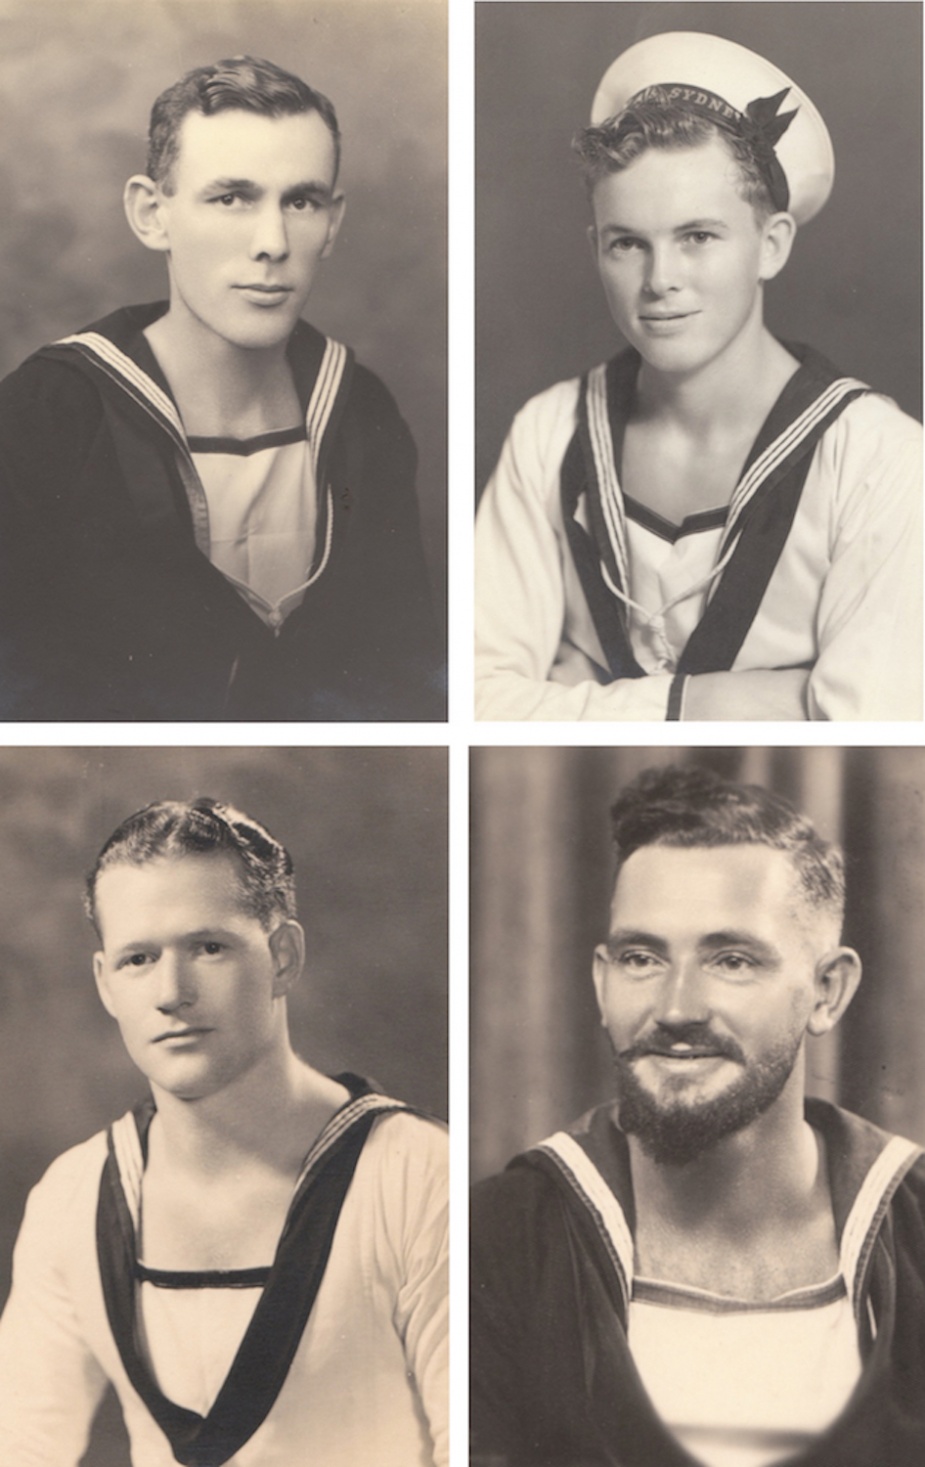 The majority of Sydney's crew comprised young men in their late teens and early twenties. Top: Able Seaman John Ernest Taylor 'JET', Able Seaman Ernest John 'Smiler' Edwards. Bottom: Able Seaman Jack 'Blue' Ralston, Able Seaman Albert Reginald Drake.